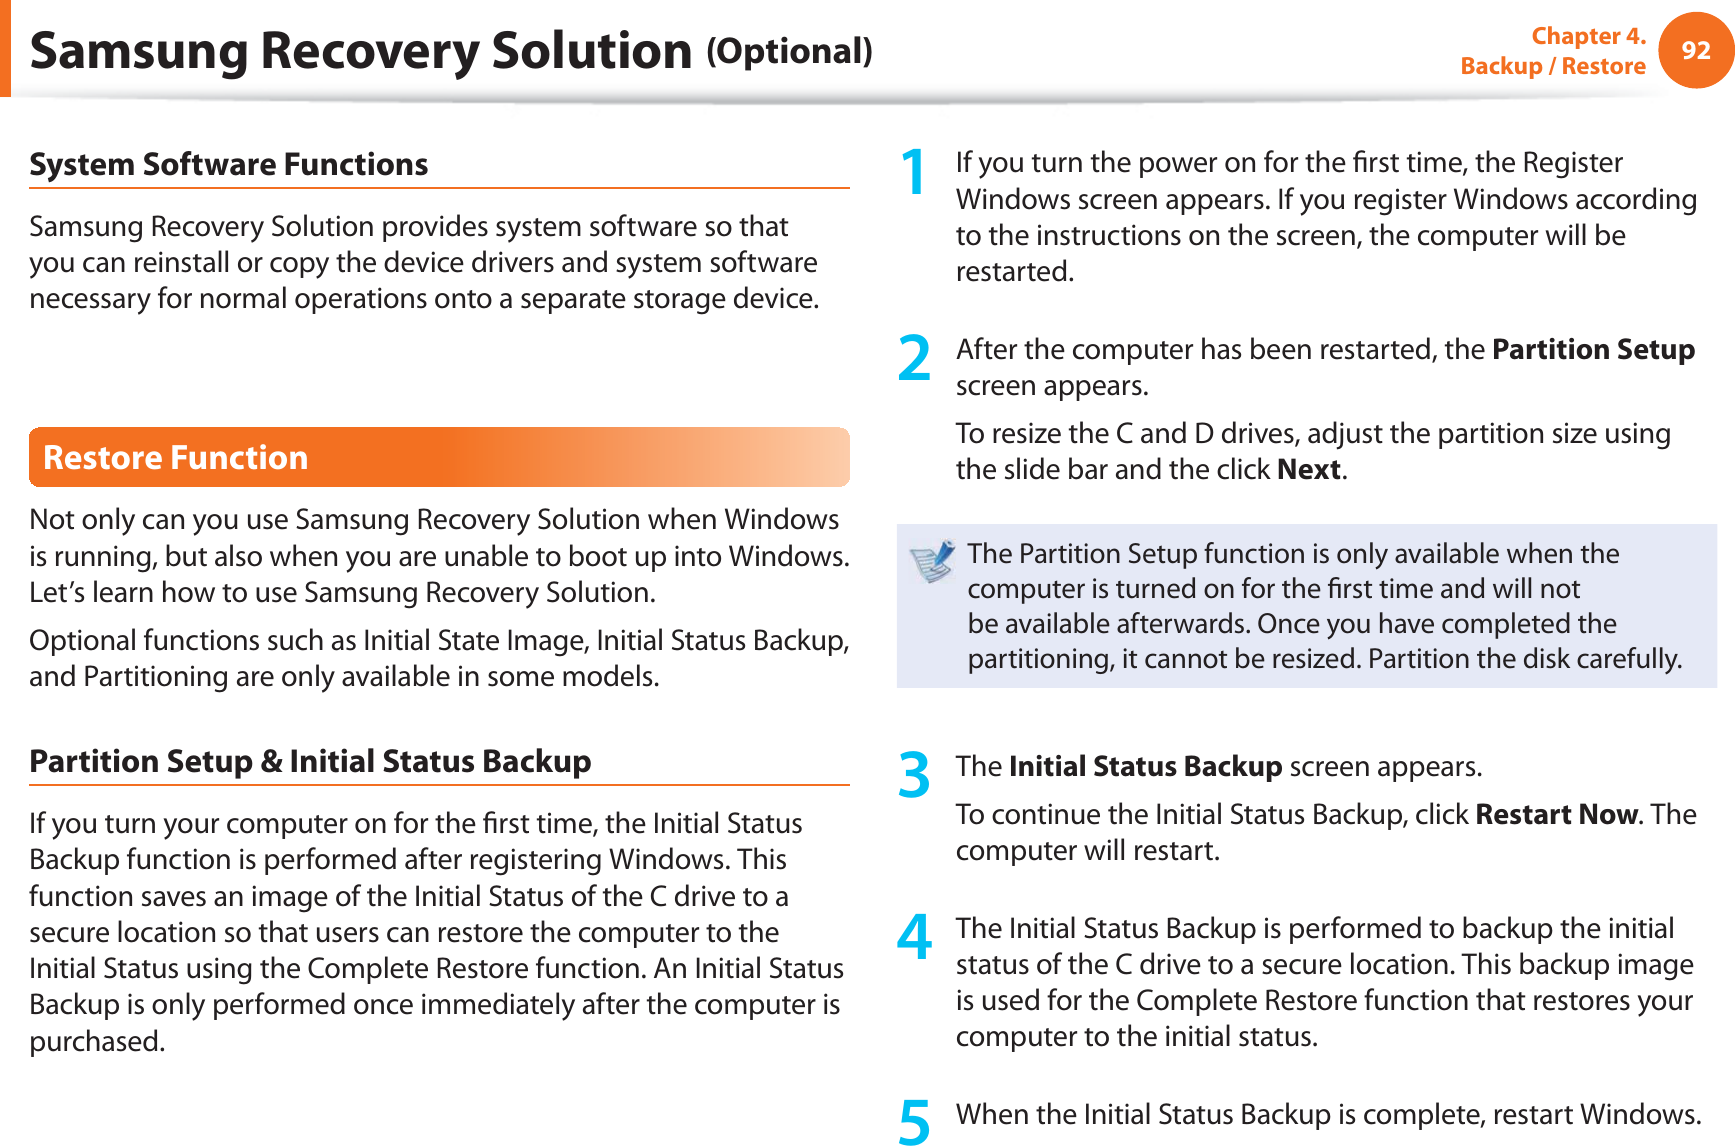 92Chapter 4.  Backup / RestoreSystem Software FunctionsSamsung Recovery Solution provides system software so that you can reinstall or copy the device drivers and system software necessary for normal operations onto a separate storage device.Restore FunctionNot only can you use Samsung Recovery Solution when Windows is running, but also when you are unable to boot up into Windows. Let’s learn how to use Samsung Recovery Solution.Optional functions such as Initial State Image, Initial Status Backup, and Partitioning are only available in some models.Partition Setup &amp; Initial Status BackupIf you turn your computer on for the  rst time, the Initial Status Backup function is performed after registering Windows. This function saves an image of the Initial Status of the C drive to a secure location so that users can restore the computer to the Initial Status using the Complete Restore function. An Initial Status Backup is only performed once immediately after the computer is purchased.1  If you turn the power on for the  rst time, the Register Windows screen appears. If you register Windows according to the instructions on the screen, the computer will be restarted.2  After the computer has been restarted, the Partition Setup screen appears. To resize the C and D drives, adjust the partition size using the slide bar and the click Next.The Partition Setup function is only available when the computer is turned on for the  rst time and will not be available afterwards. Once you have completed the partitioning, it cannot be resized. Partition the disk carefully.3 The Initial Status Backup screen appears. To continue the Initial Status Backup, click Restart Now. The computer will restart.4  The Initial Status Backup is performed to backup the initial status of the C drive to a secure location. This backup image is used for the Complete Restore function that restores your computer to the initial status.5  When the Initial Status Backup is complete, restart Windows.Samsung Recovery Solution (Optional)